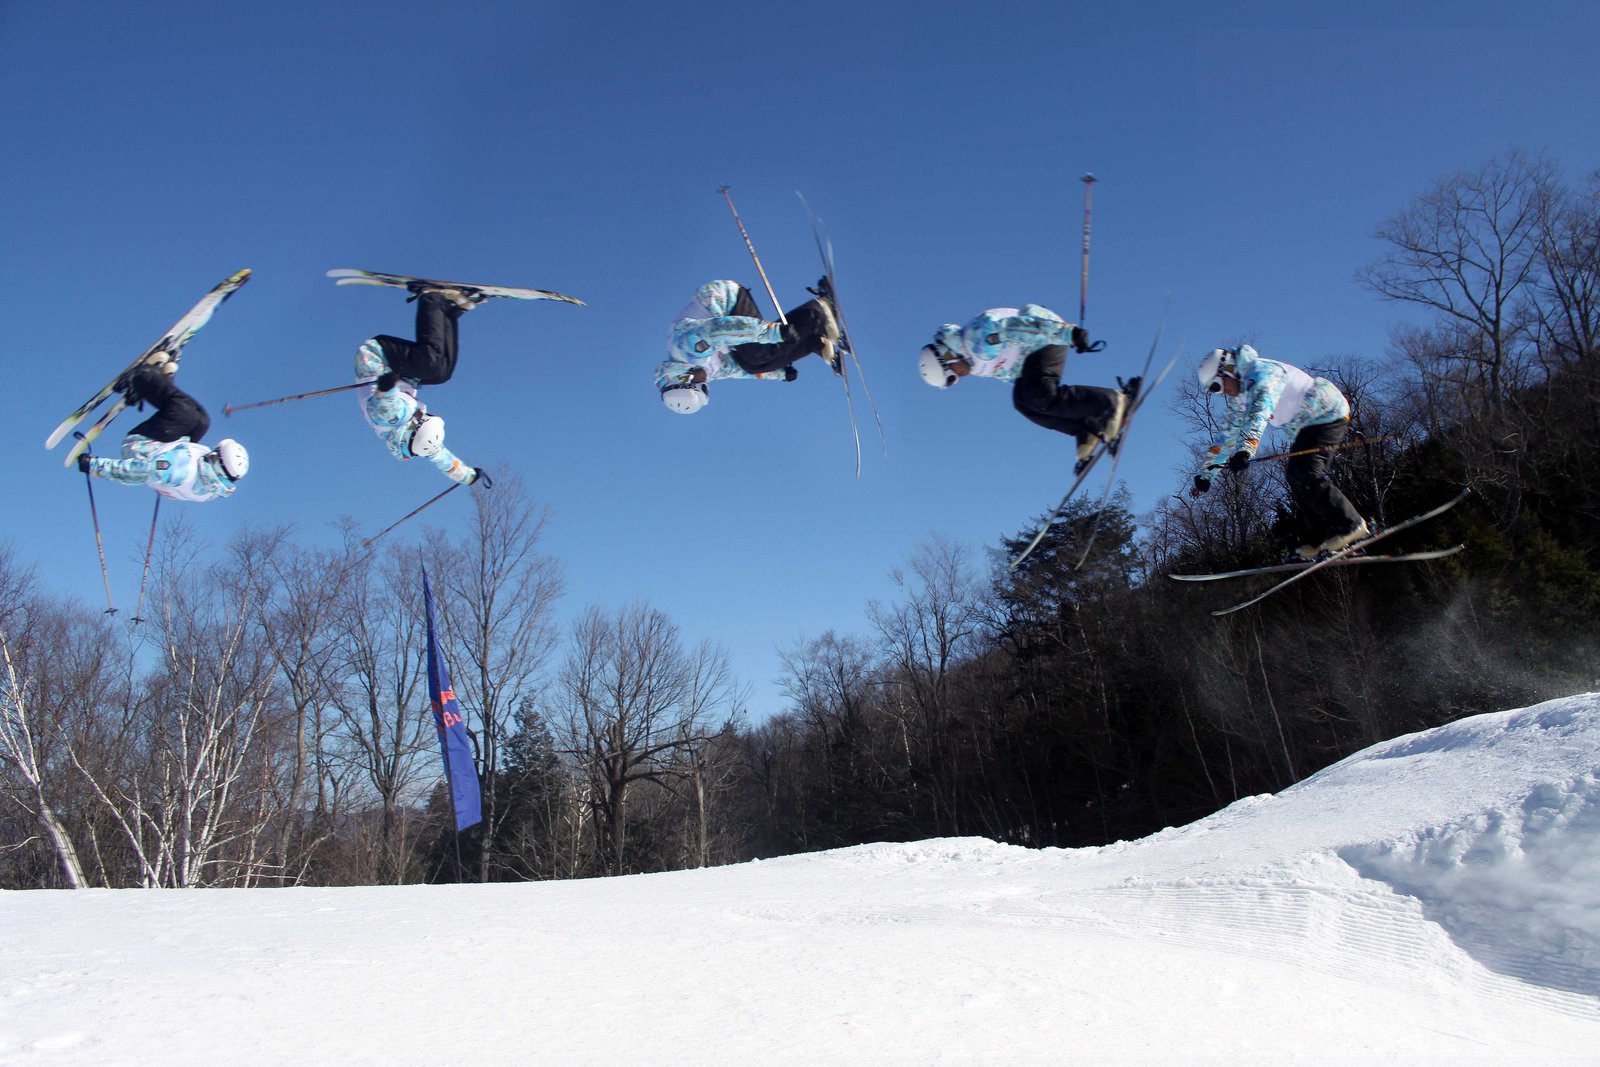 Front flip sequence